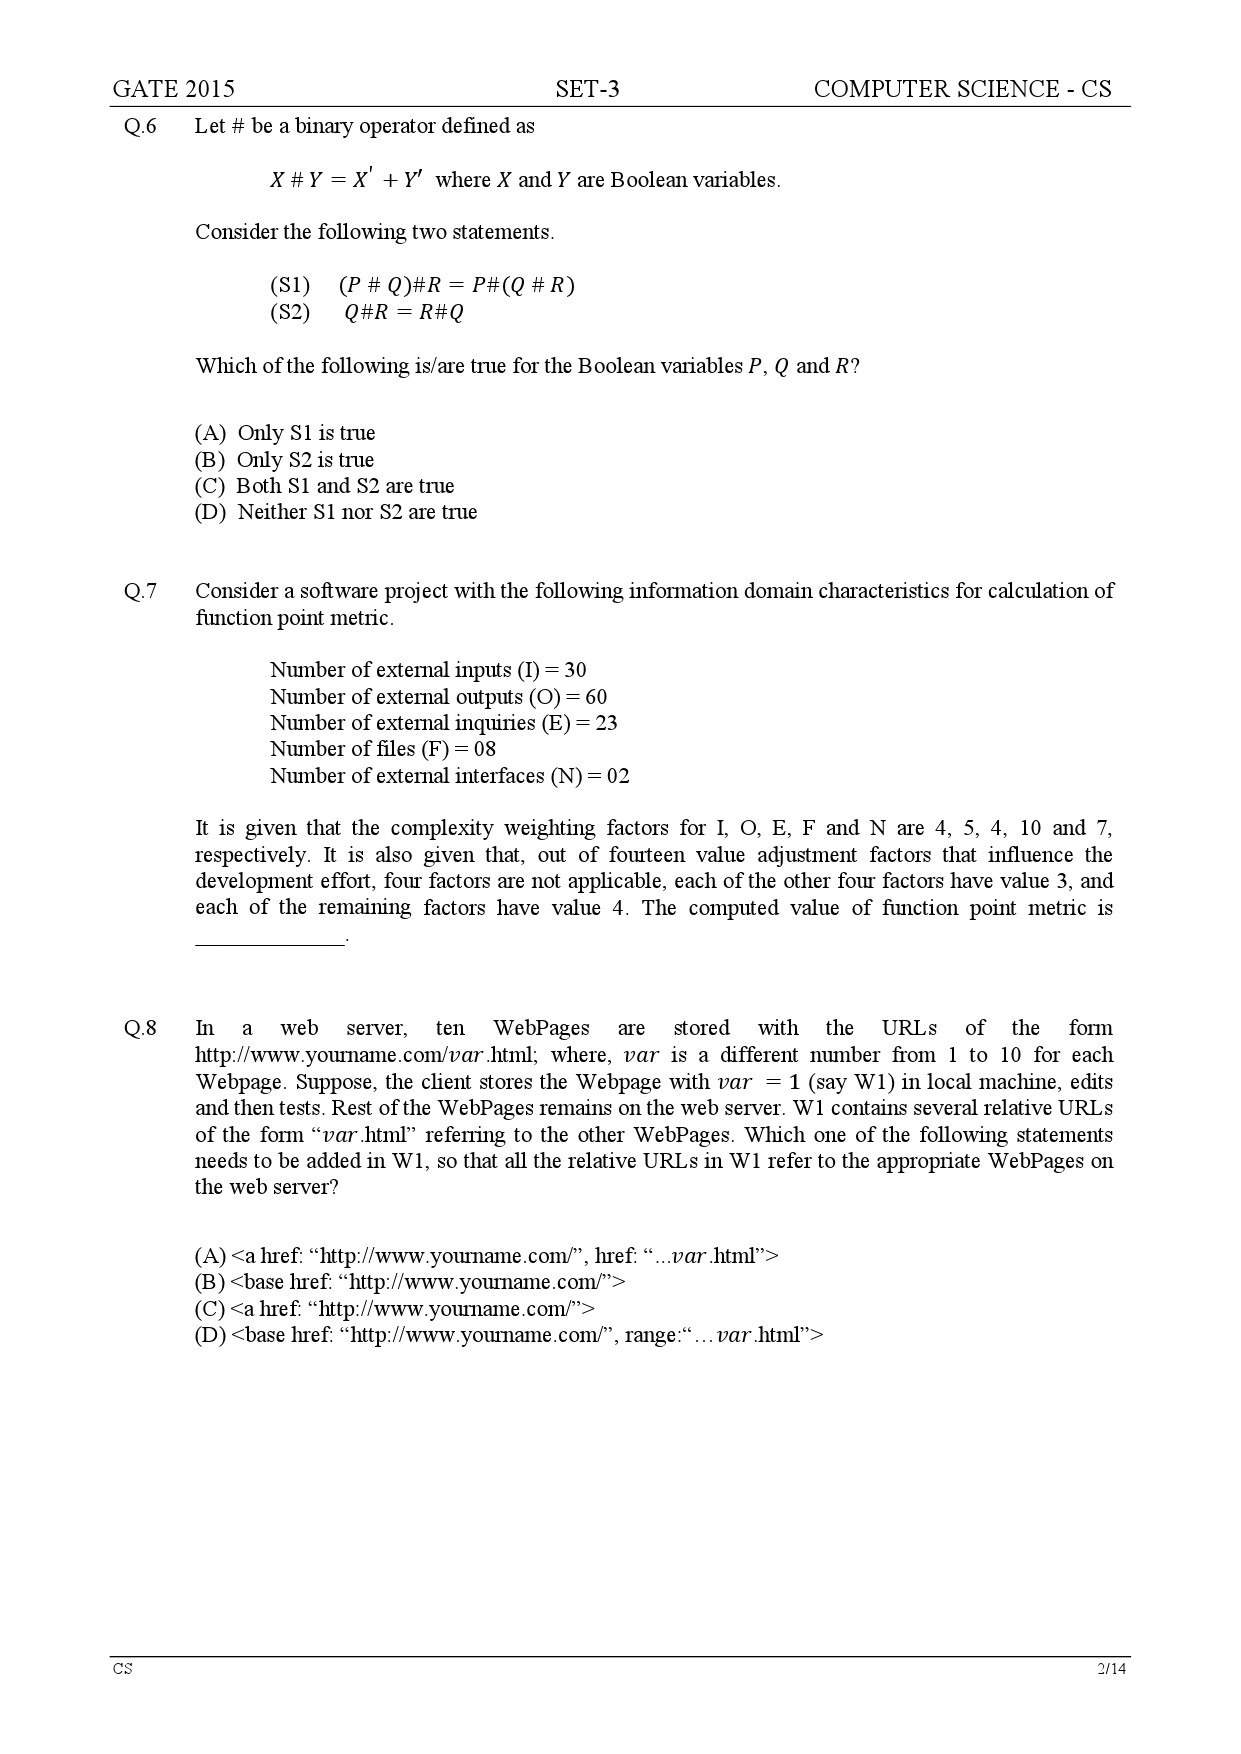 GATE Exam Question Paper 2015 Computer Science and Information Technology Set 3 2